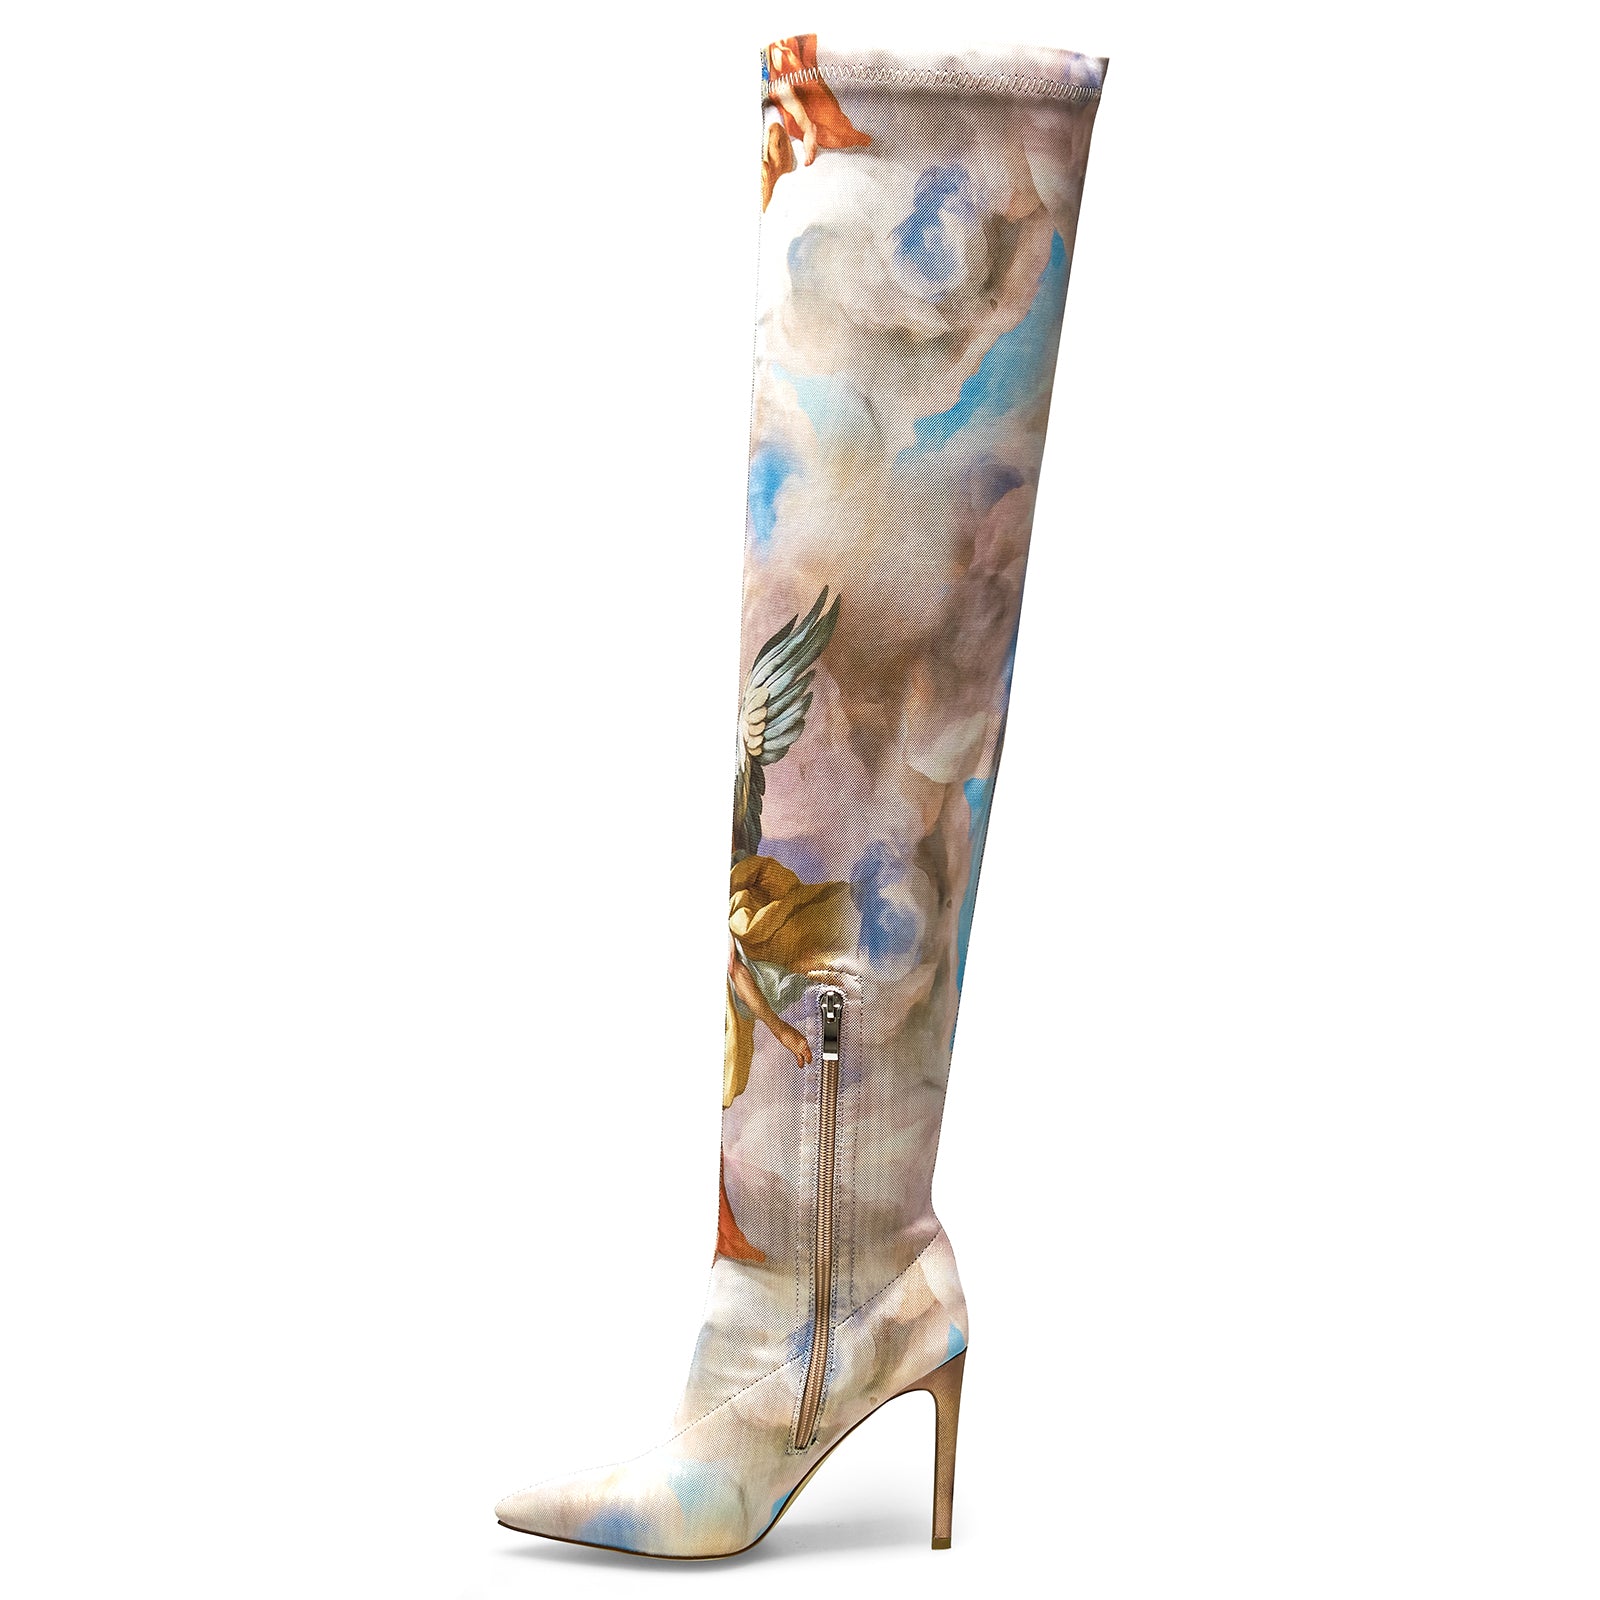 Women's Pointed Toe Stiletto Canvas Stretch Over High Heels The Knee Boots